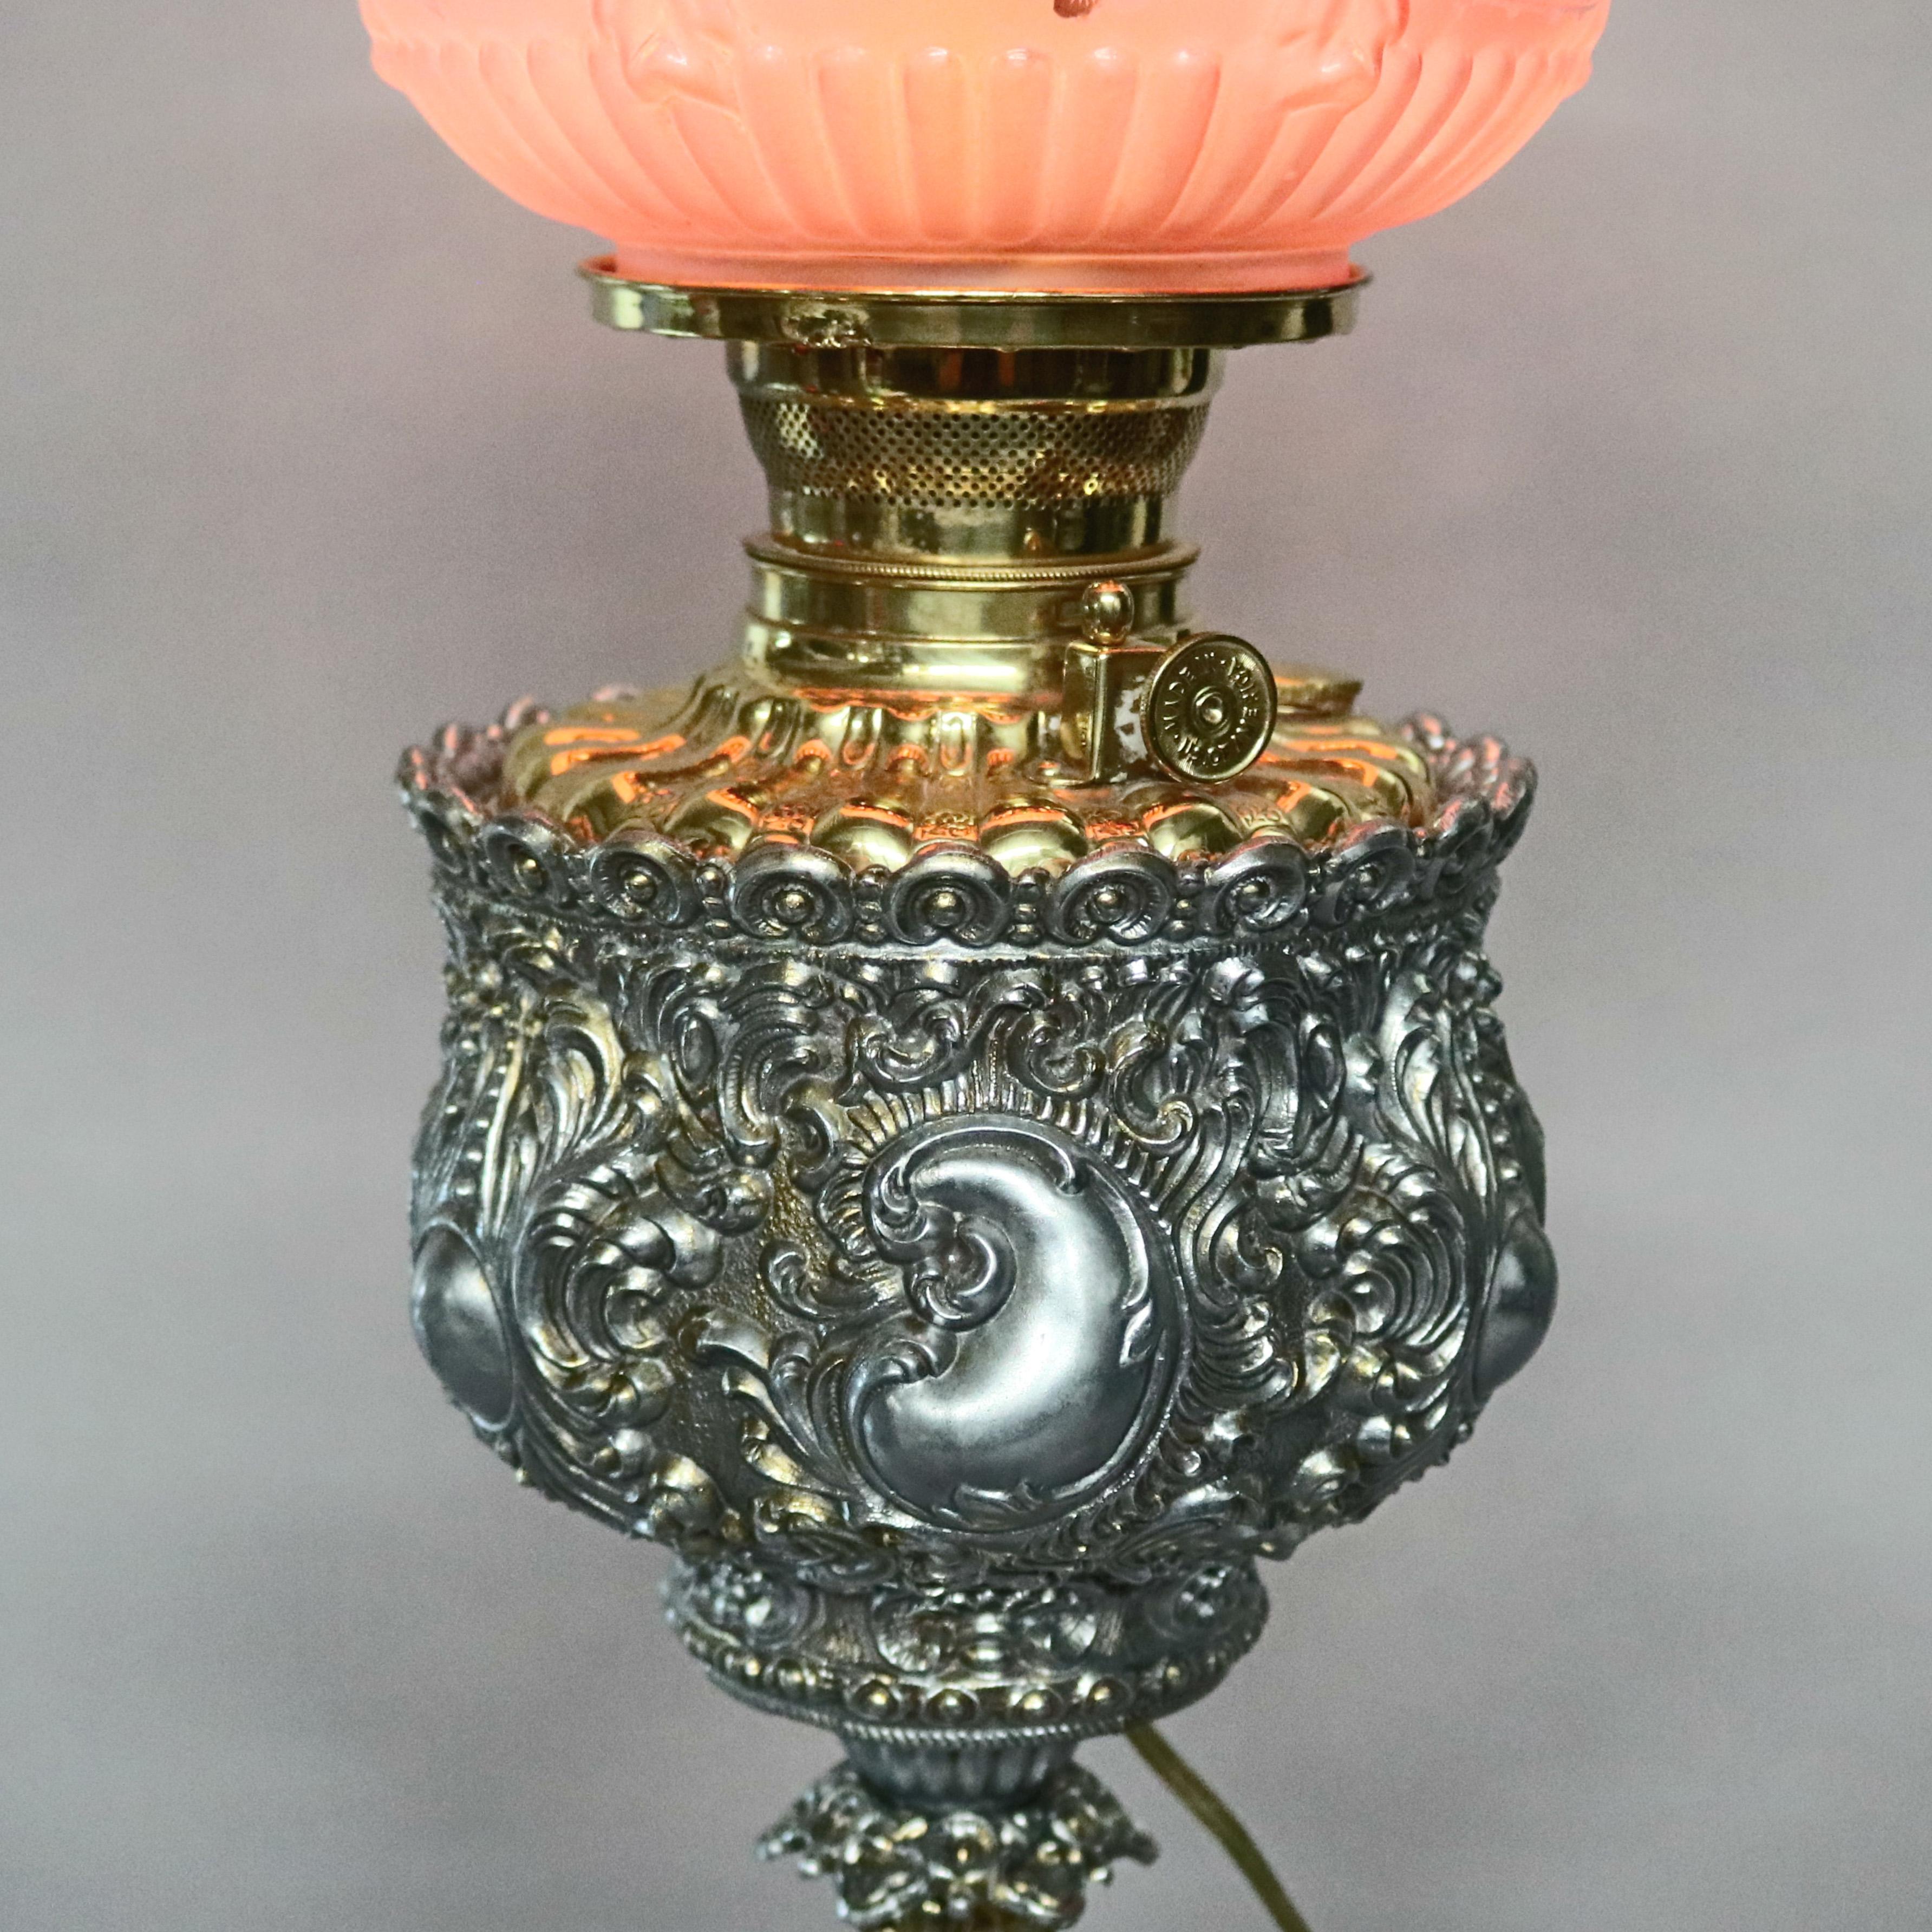 An antique Victorian Bradley and Hubbard School parlor lamp offers two toned gold and silver gilt base in allover foliate relief design supporting blown out cranberry satin glass shade and raised on four scroll form feet, electrified, circa